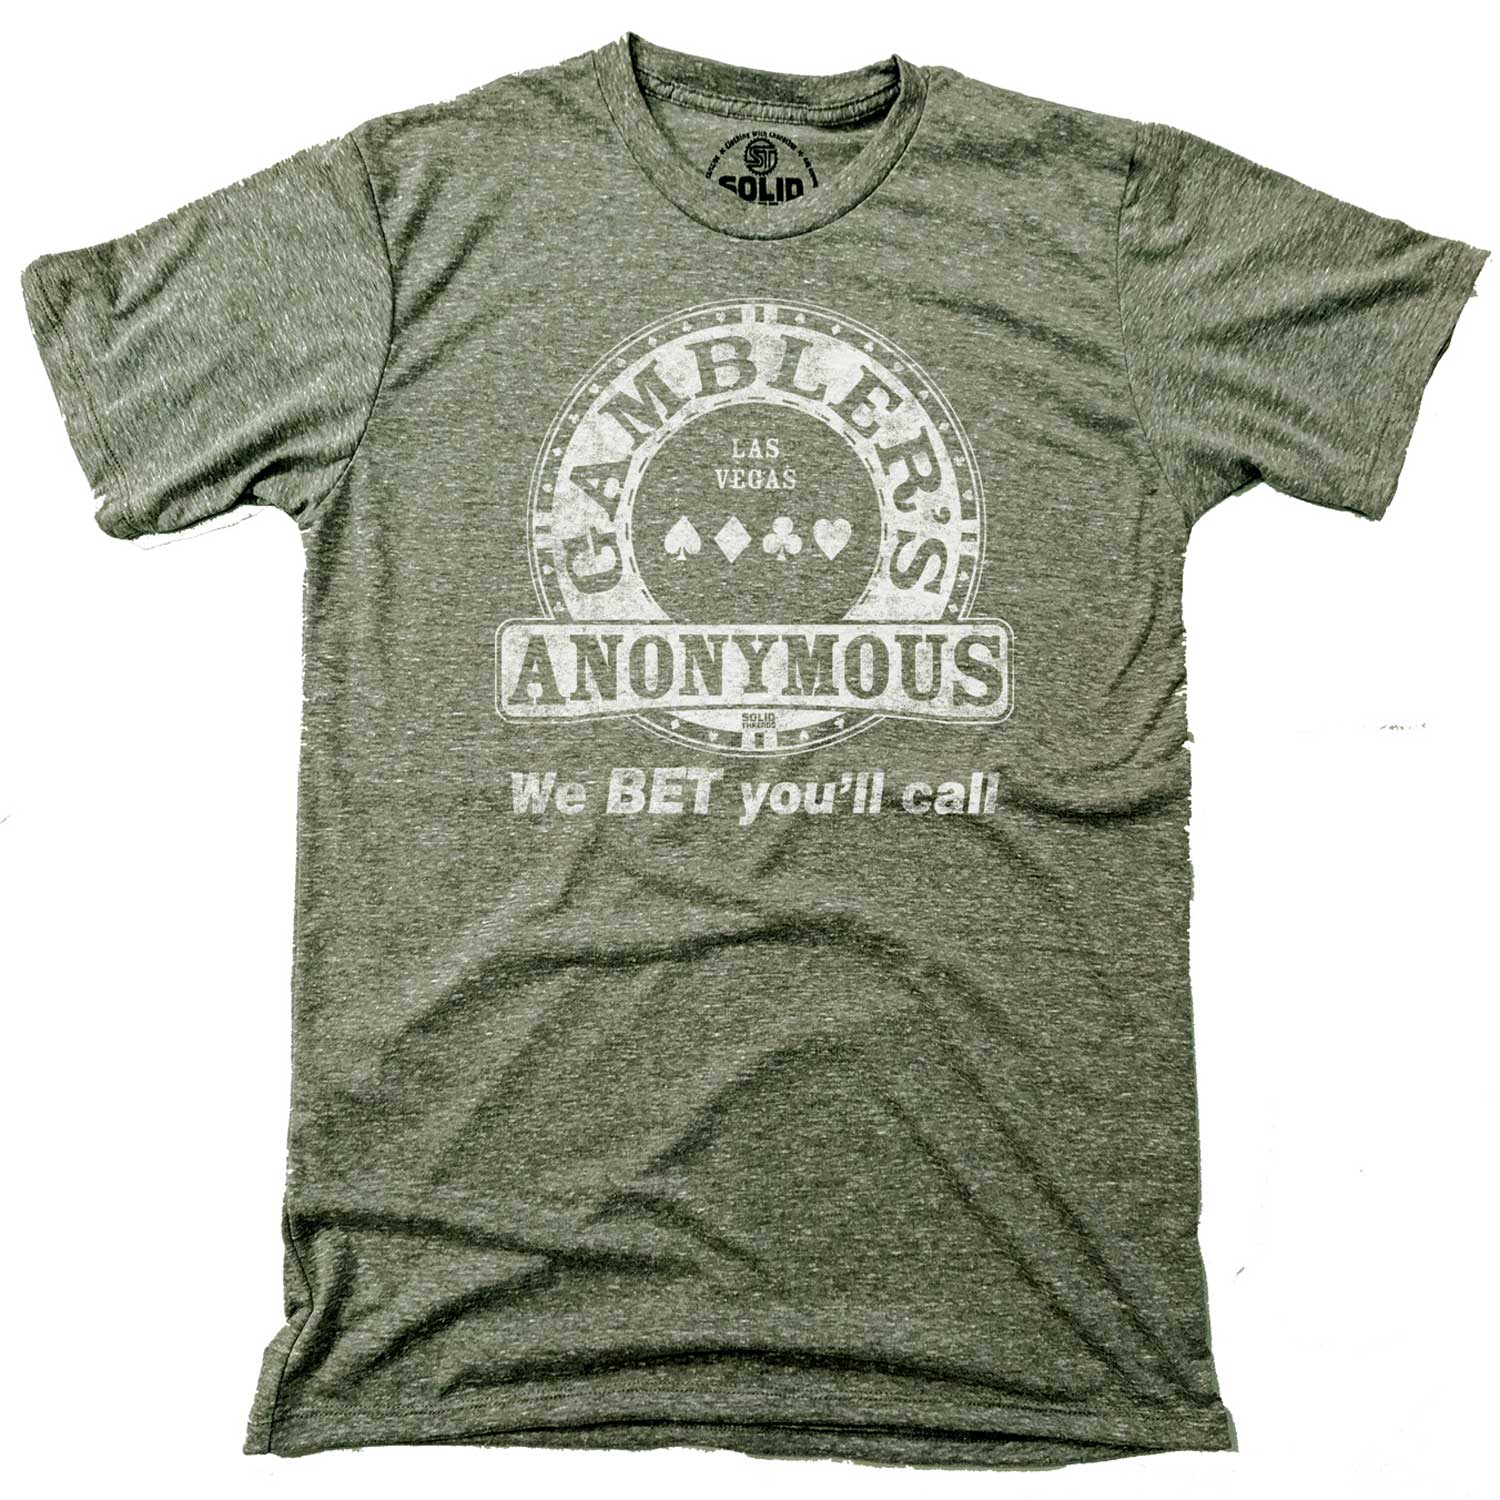 Men's Gambler's Anonymous Vintage Graphic T-Shirt | Funny Vegas Poker Soft Tee | Solid Threads